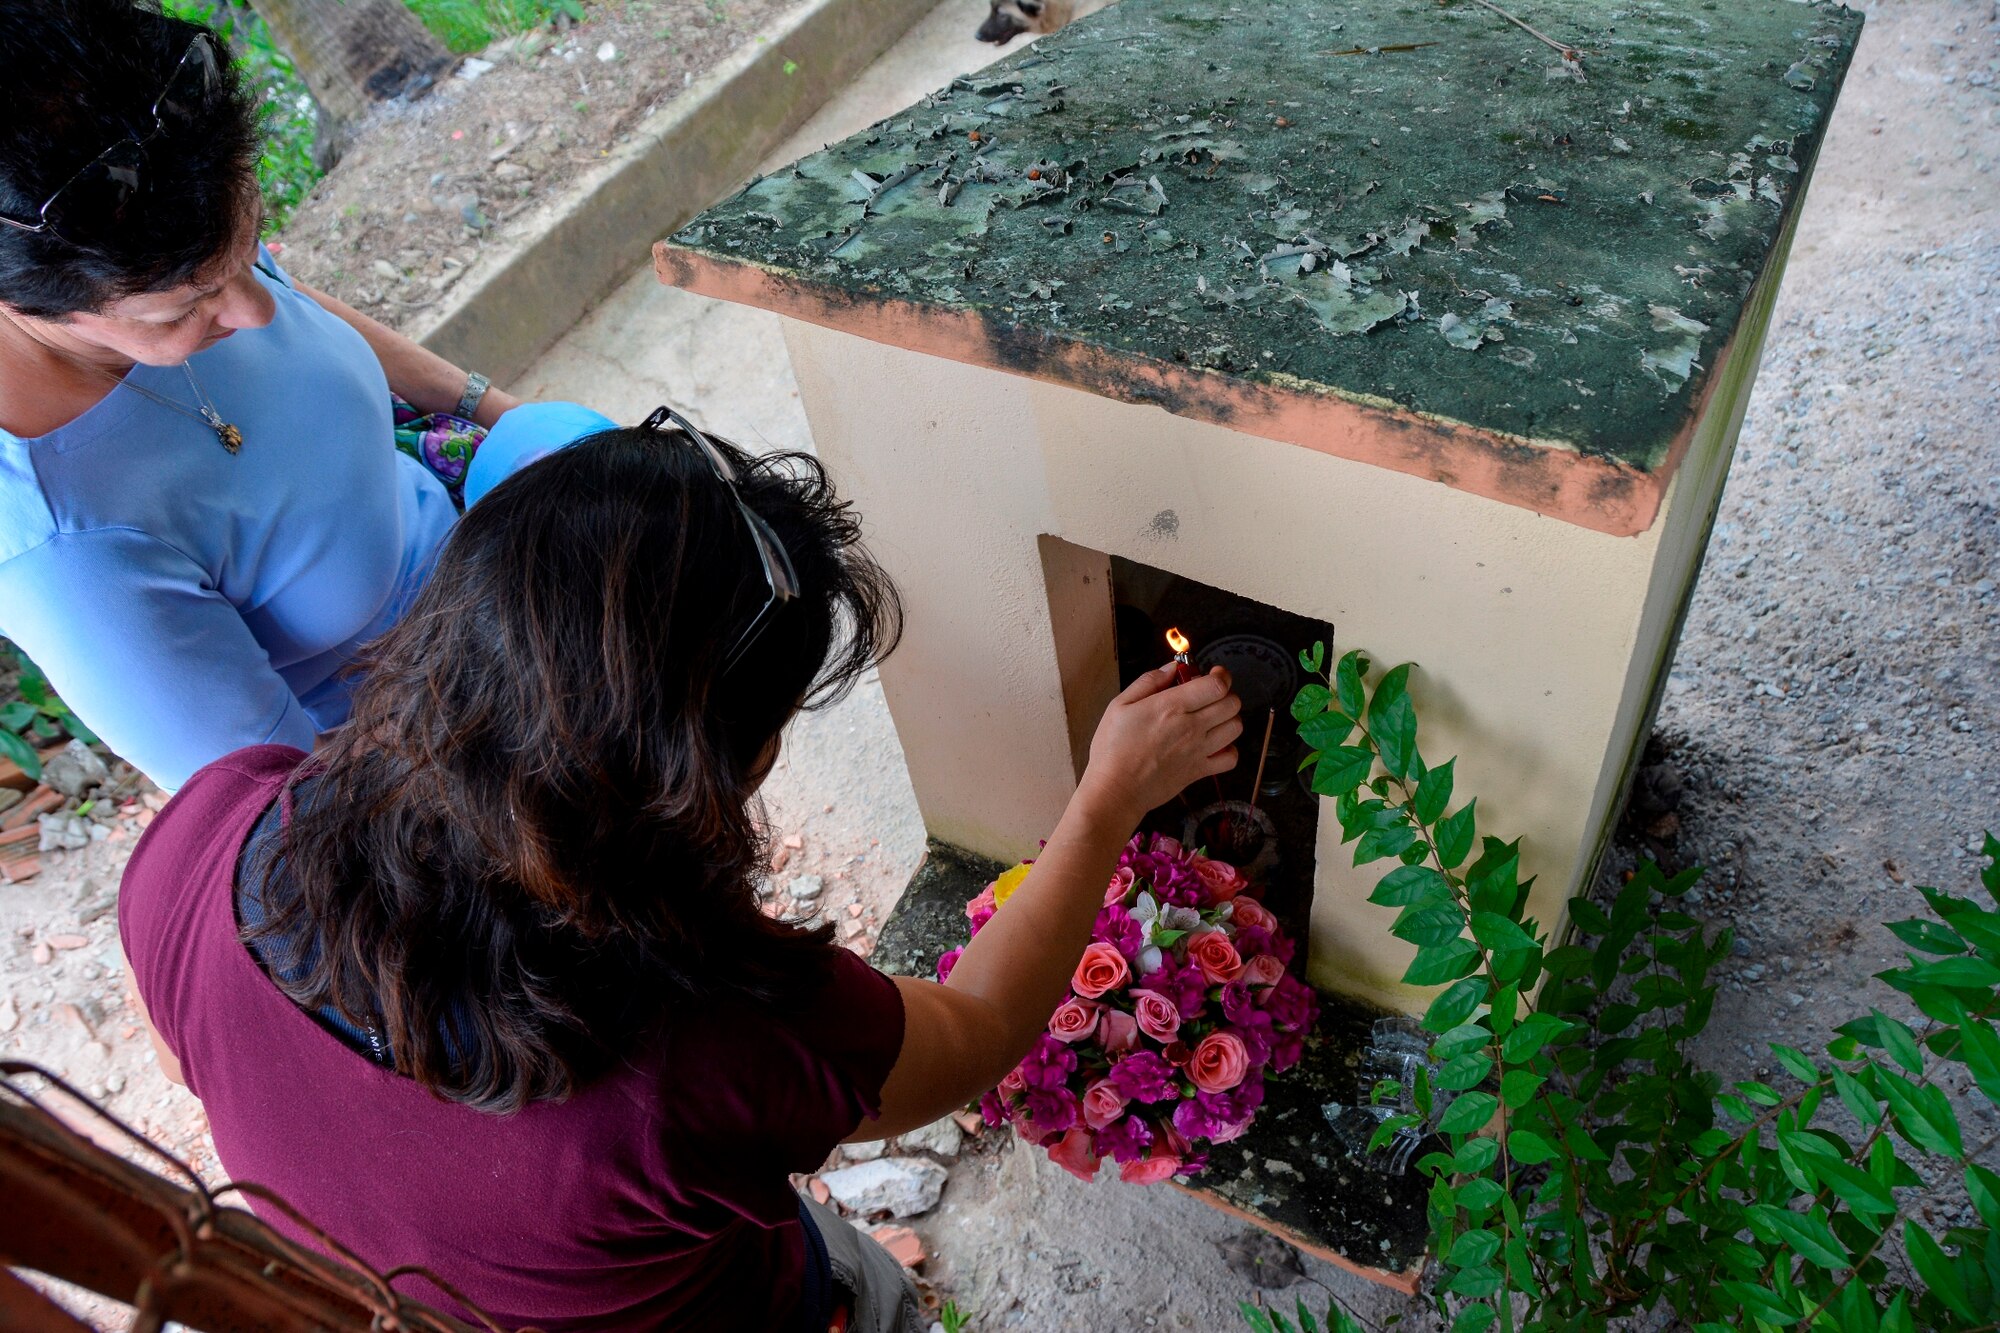 Operation Babylift survivor Aryn Lockhart, lights a memorial candle at a shrine commemorating those lost during the crash of a C-5A in Saigon, Vietnam, in April 1975. More than 70 orphans bound for the United States died in the crash.